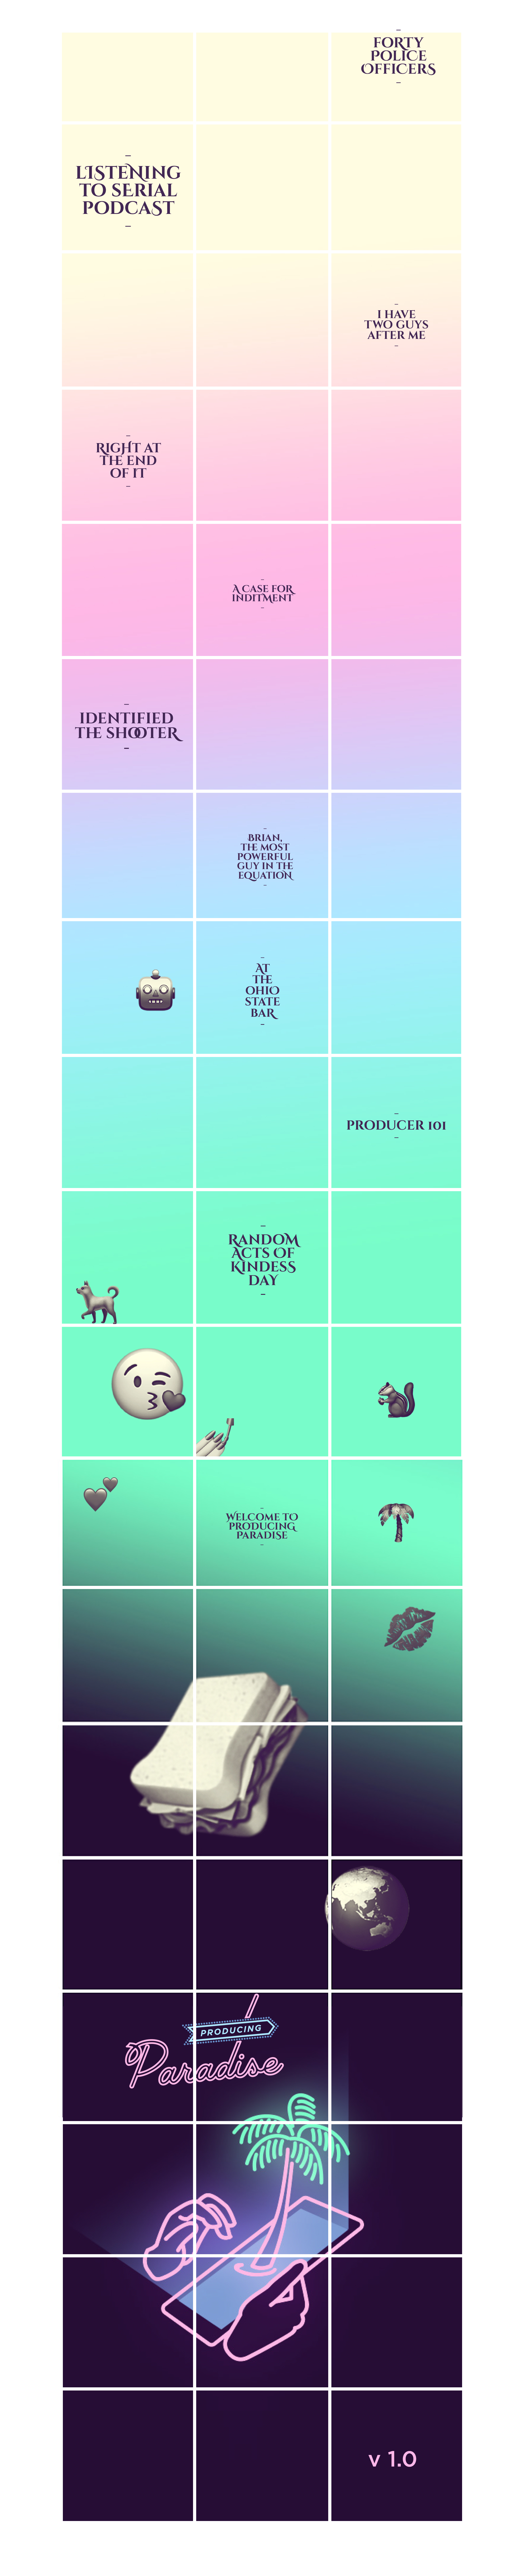 A mockup of an Instagram profile grid with dark purple squares at the bottom behind a 'Producing Paradise' logo, then the background cycles through colour gradients from bottom to top (neon green, baby blue, blush pink, to beige) and has dark purple duotone versions of Apple emoji randomly placed throughout the grid, as well as post title text